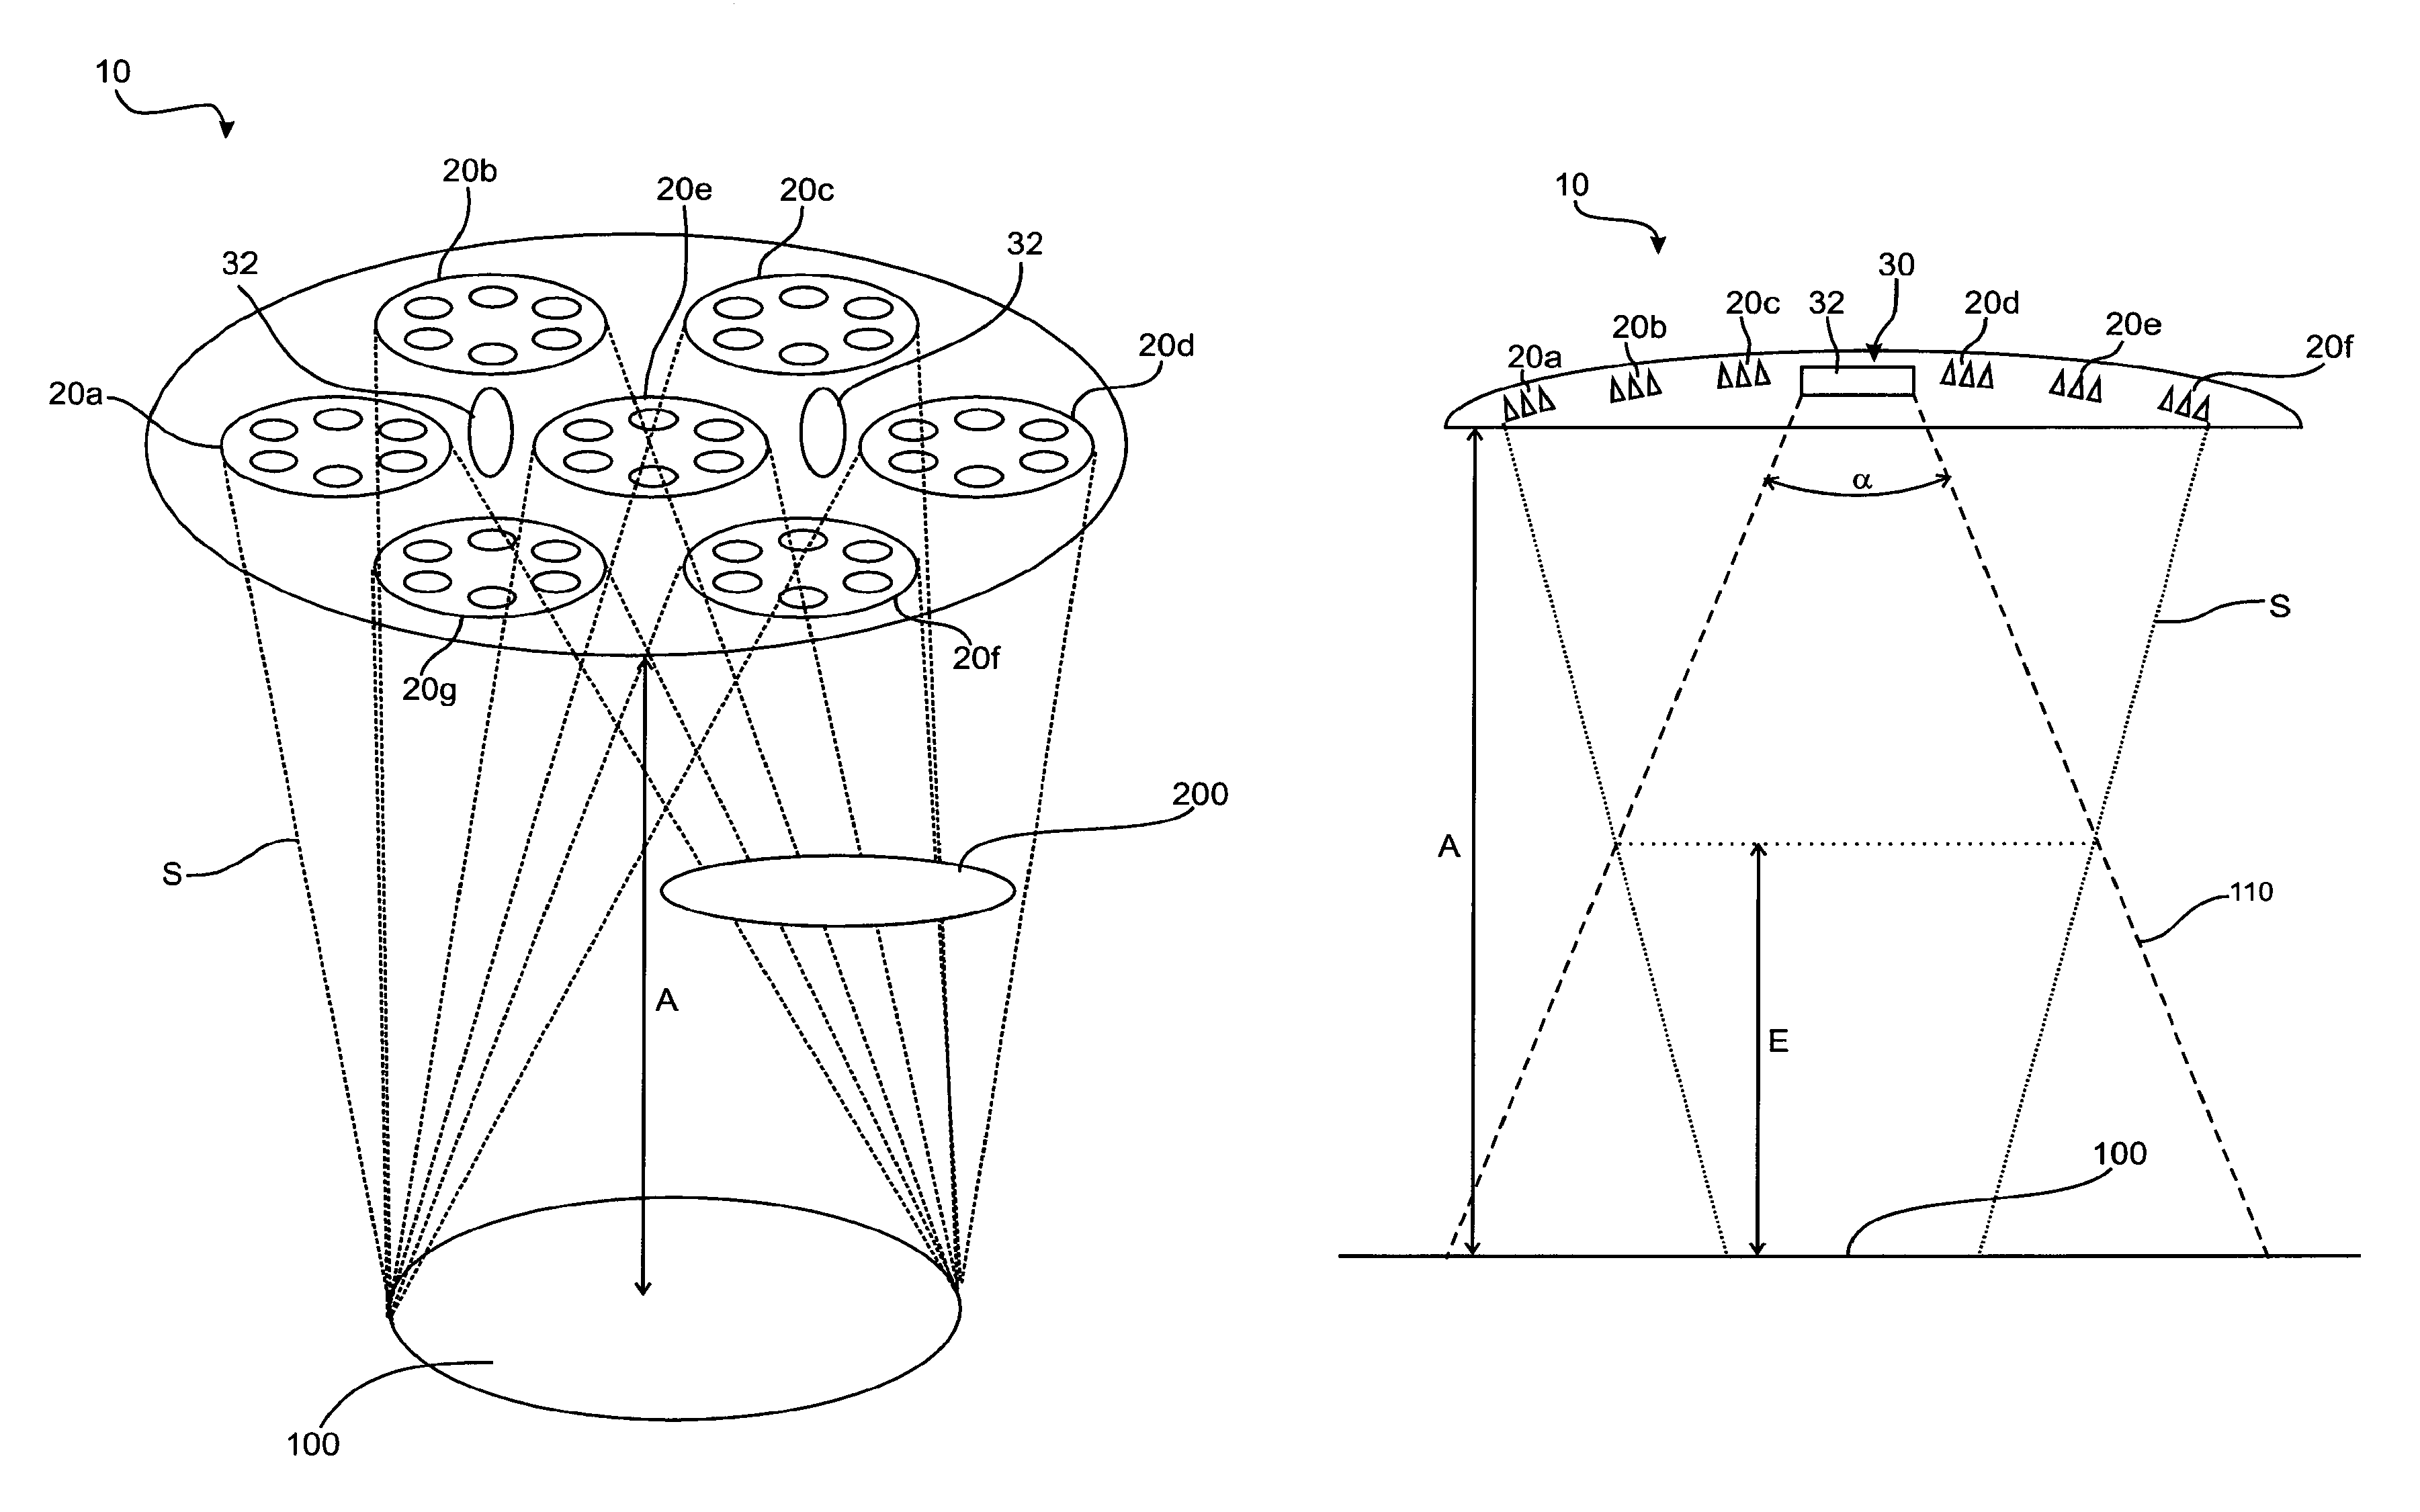 Method for improving the illumination of an illumination region from an illumination device